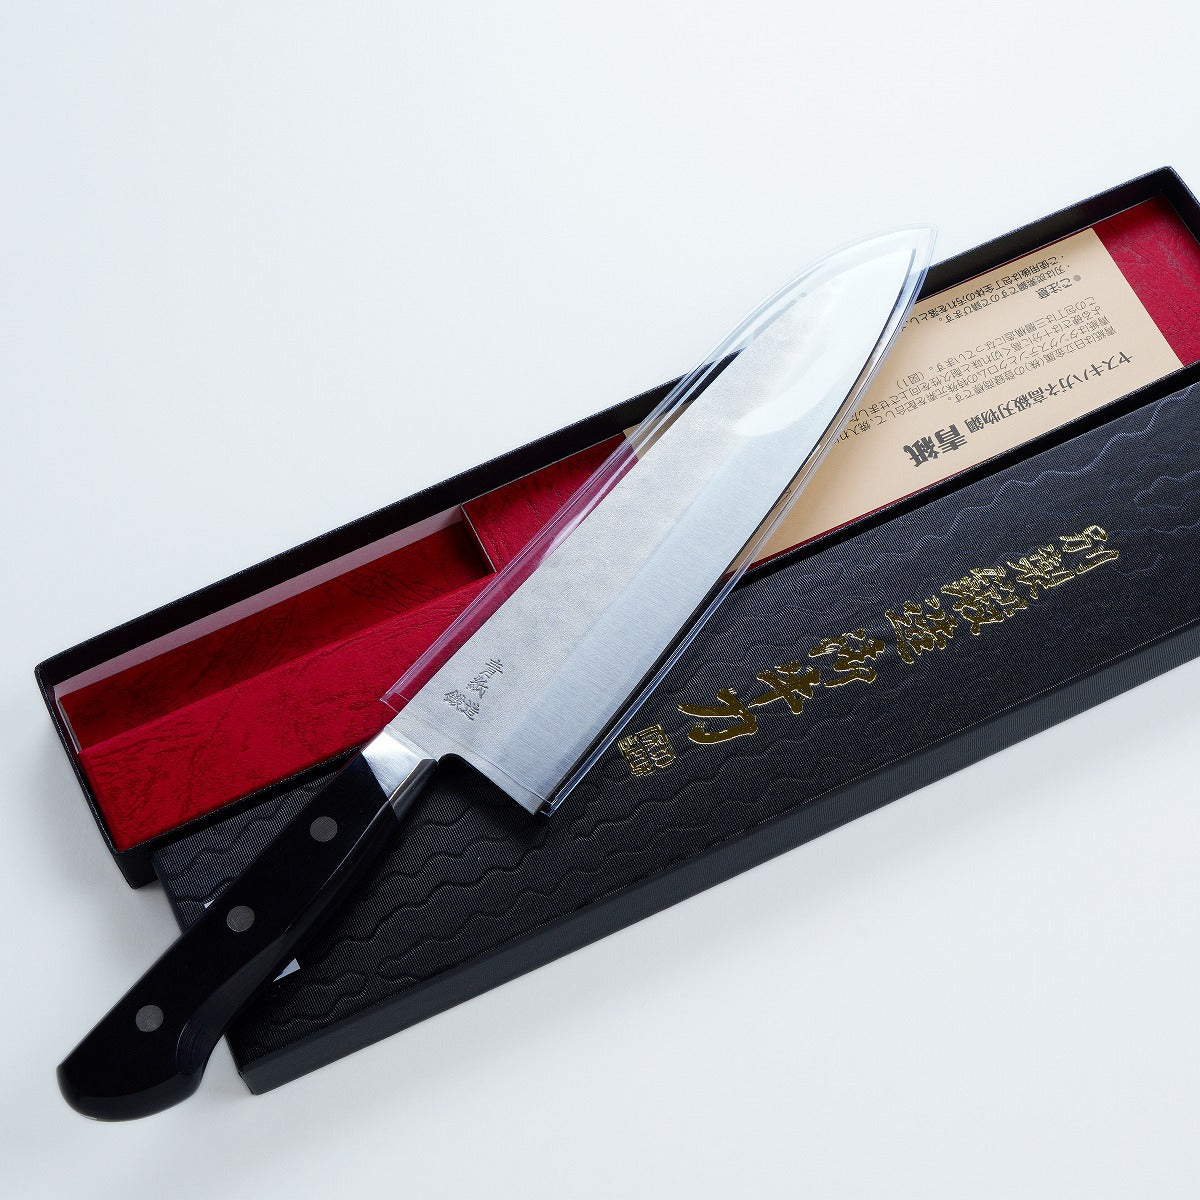 "HONMAMON" Gyuto (Chef's Knife) Aogami Steel No.2 with Hammered Pattern, 200mm